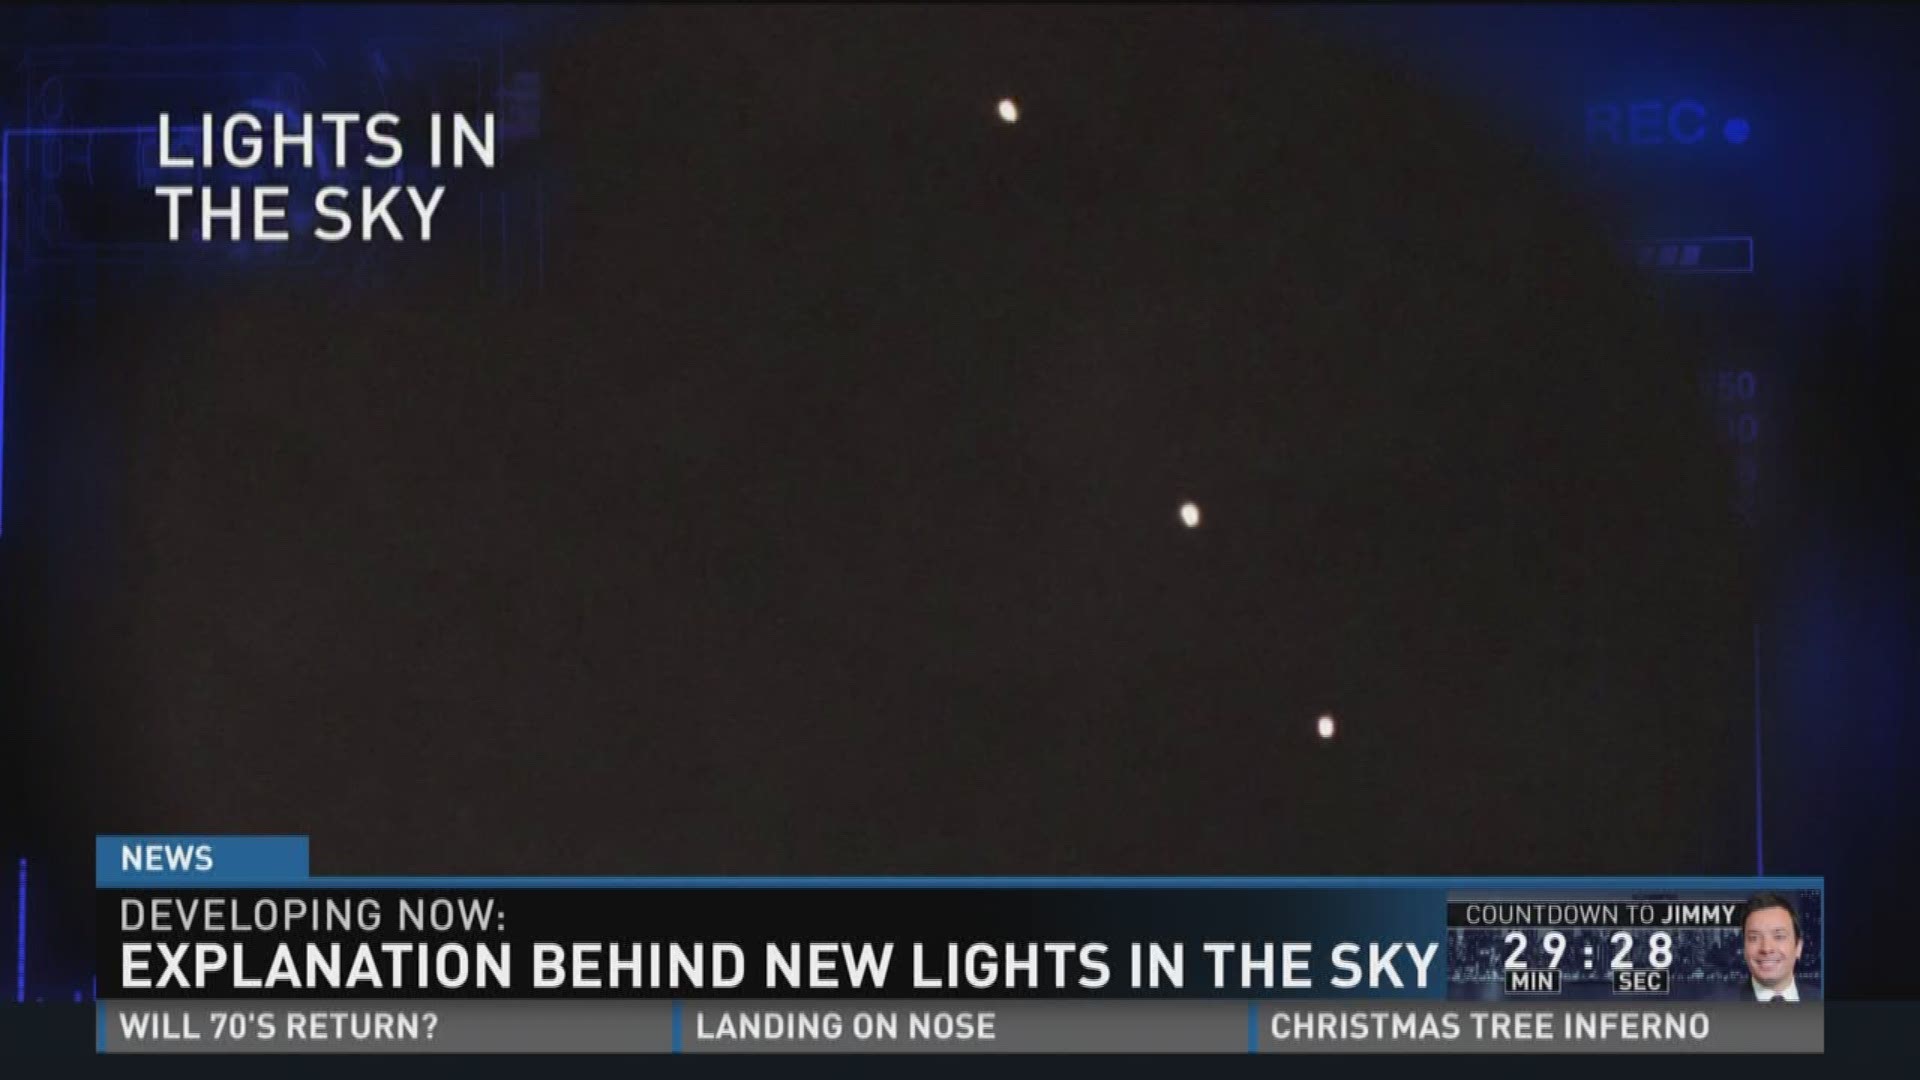 Explanation behind new lights in the sky.